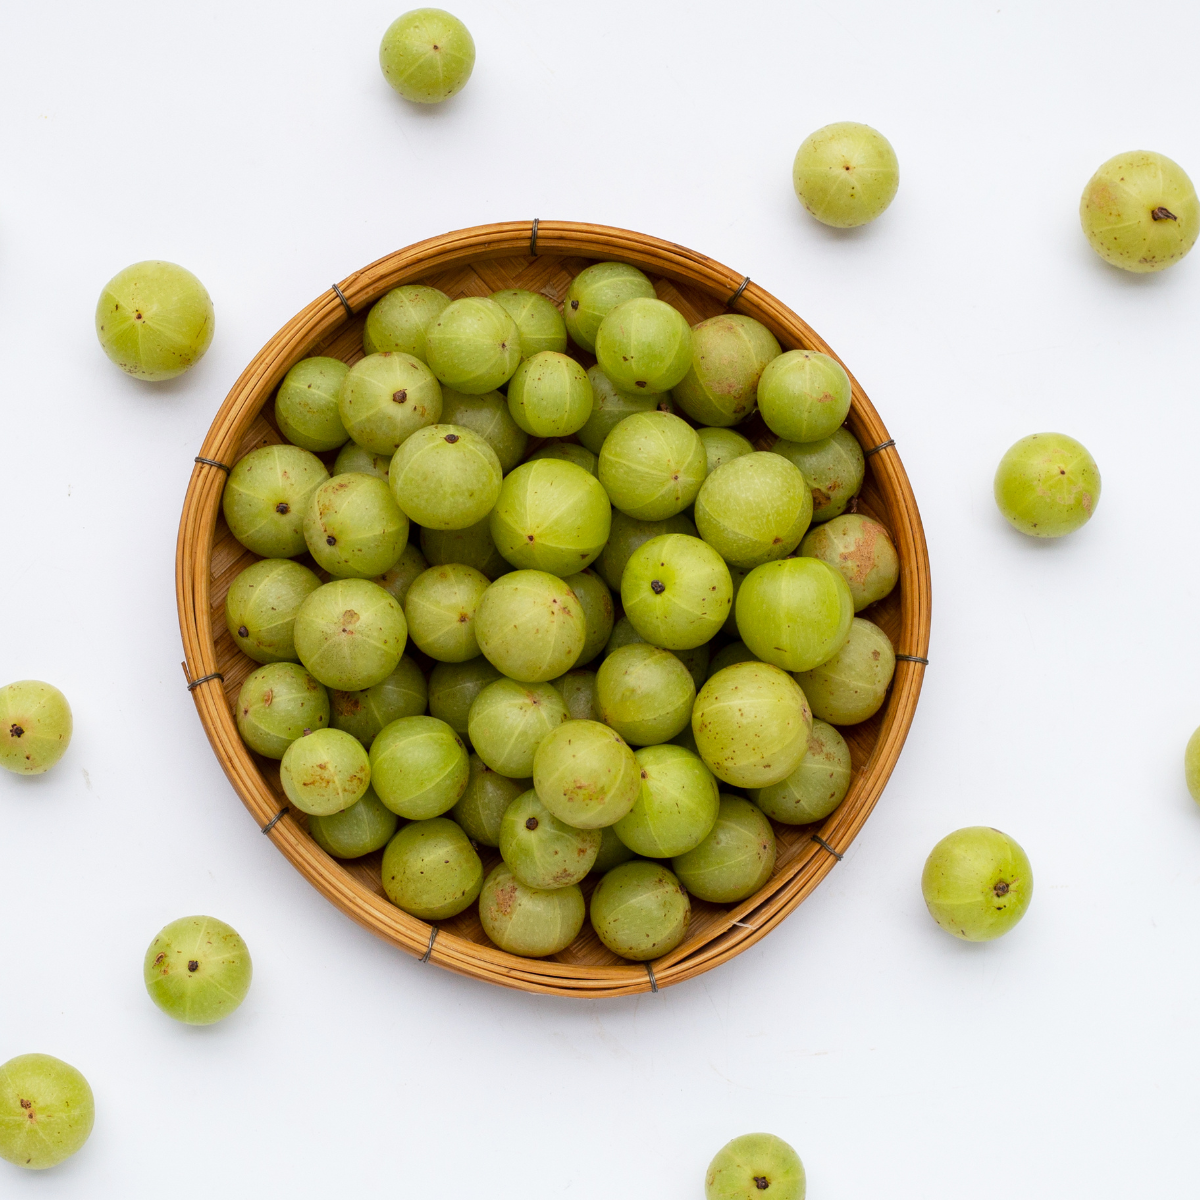 Amla - 'Berry' Rich in Vitamin C! Unpacking the Concept of Antioxidants